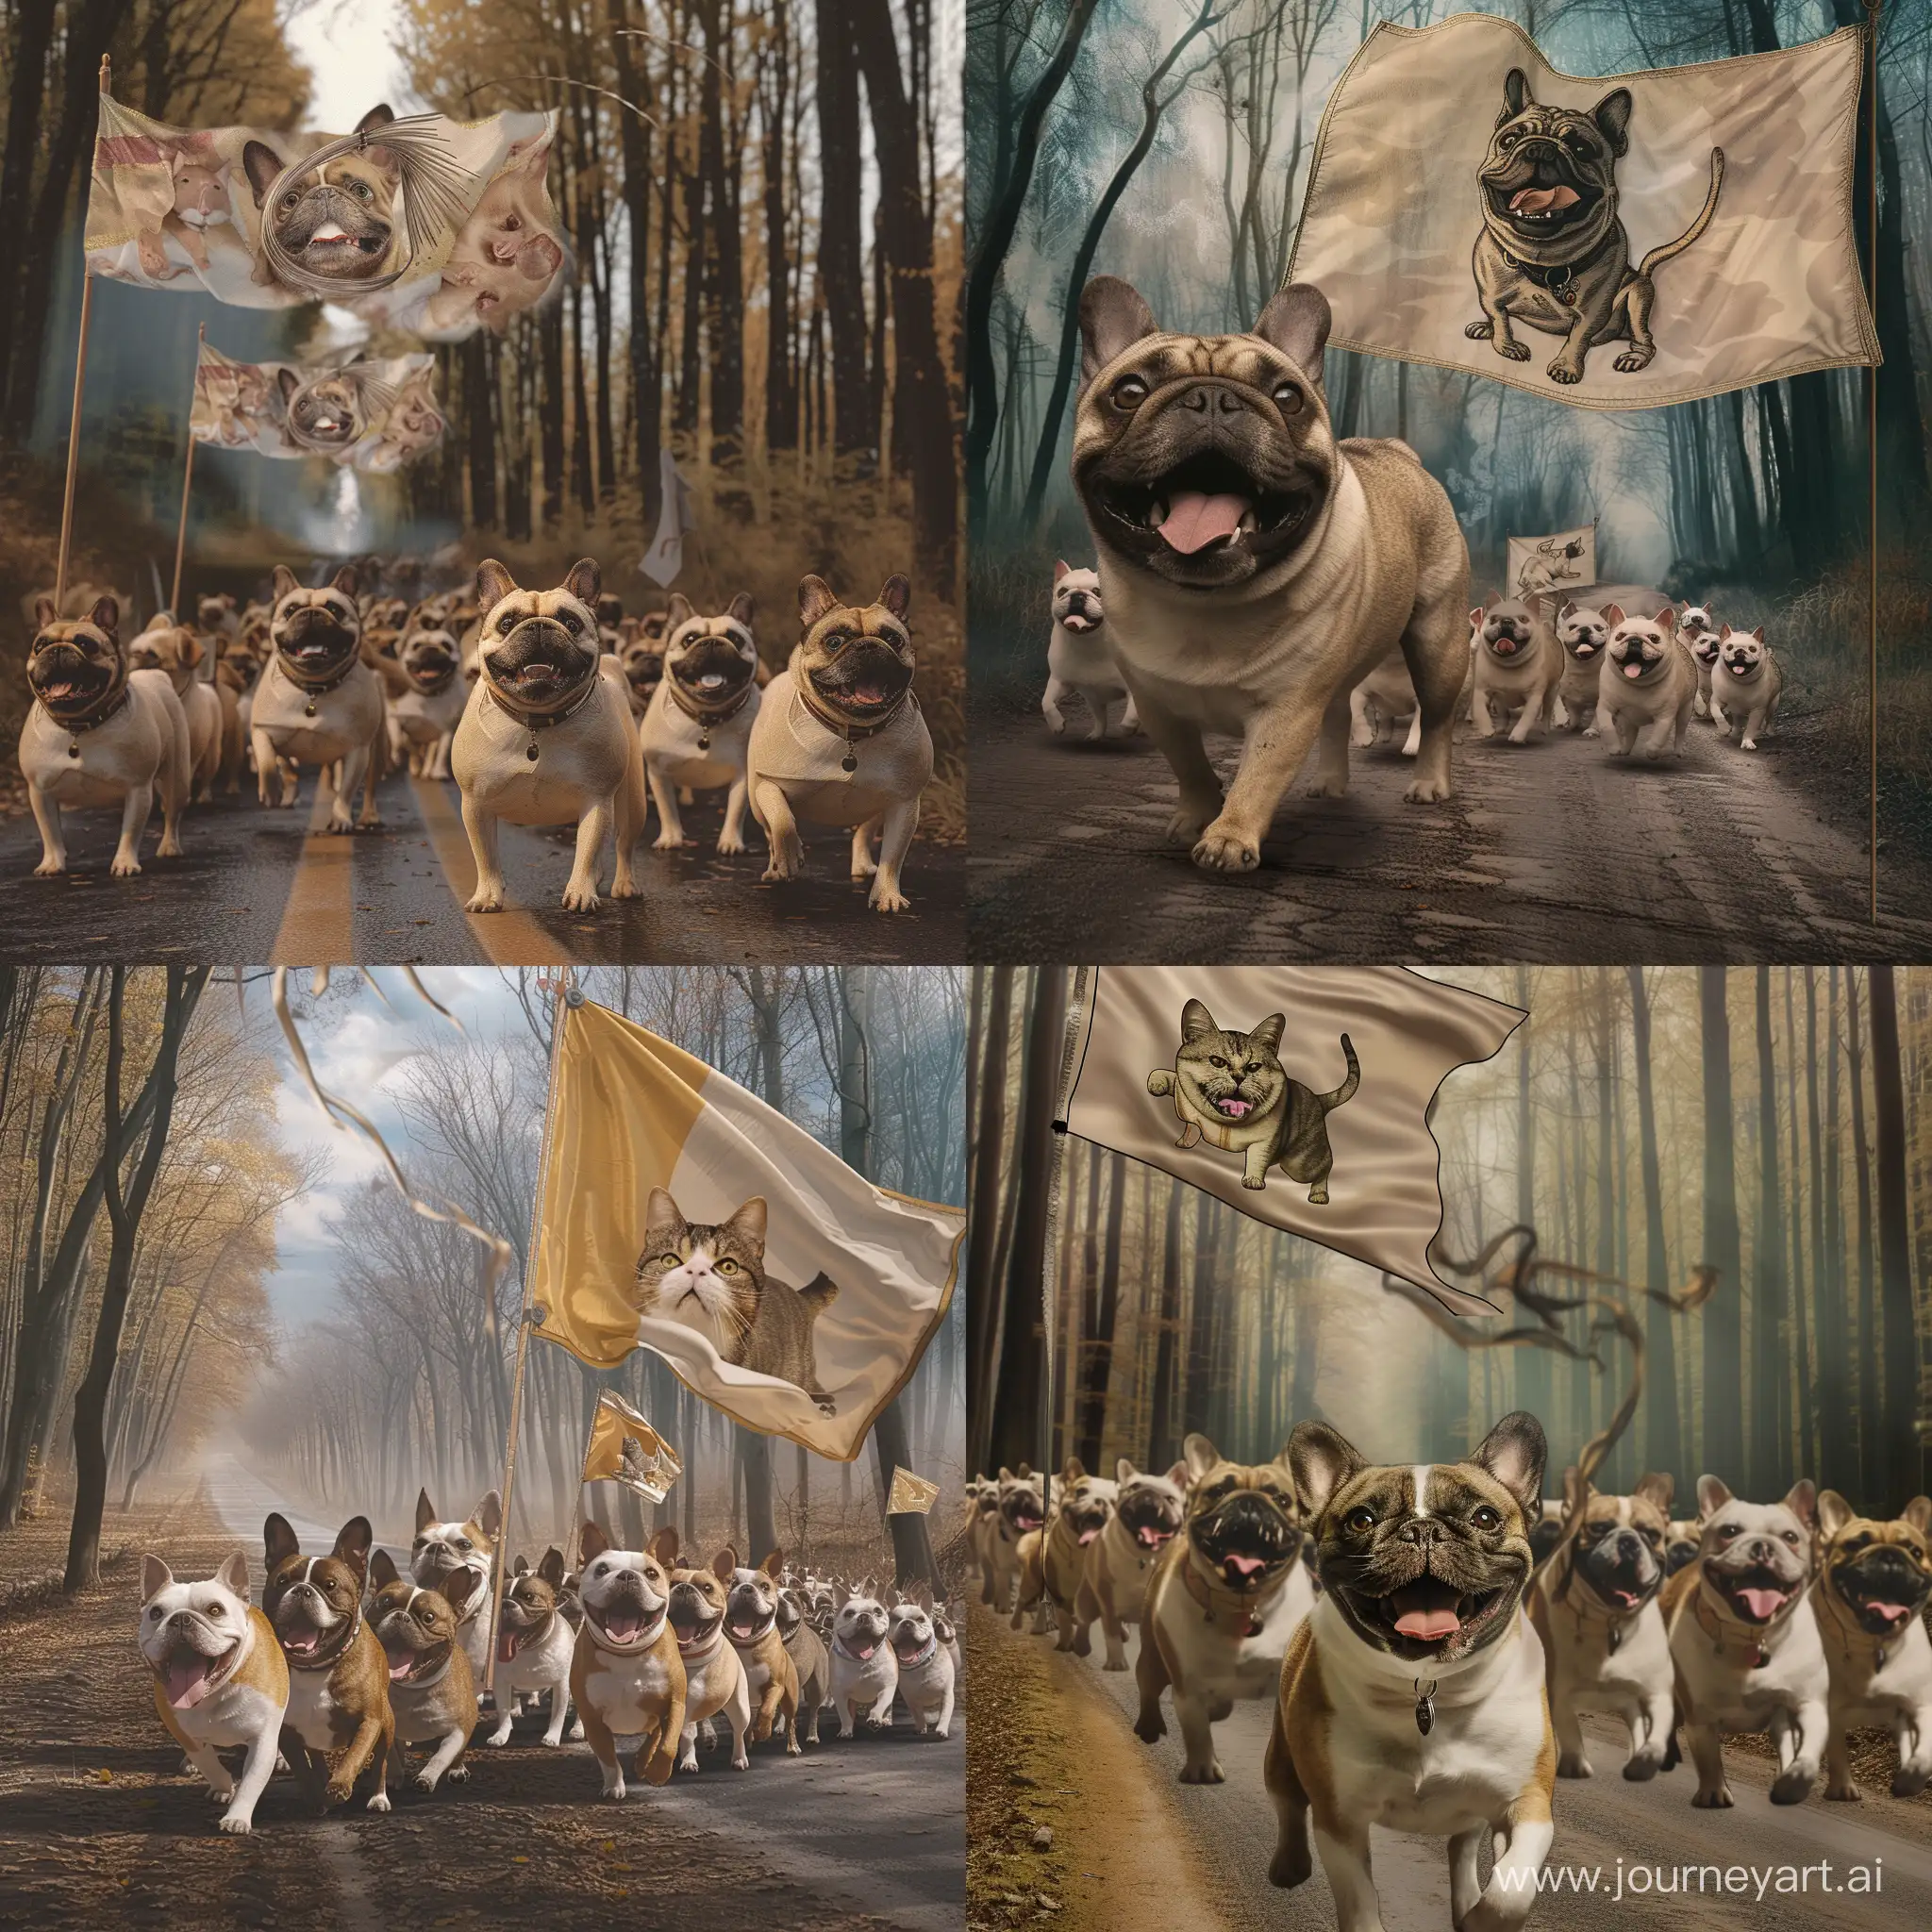 an army of Franch bulldog, proud and happy, marching through a road in the woods, meaowing and singing, with a flag weaving in the air representing an araldic version of a cat --v 6